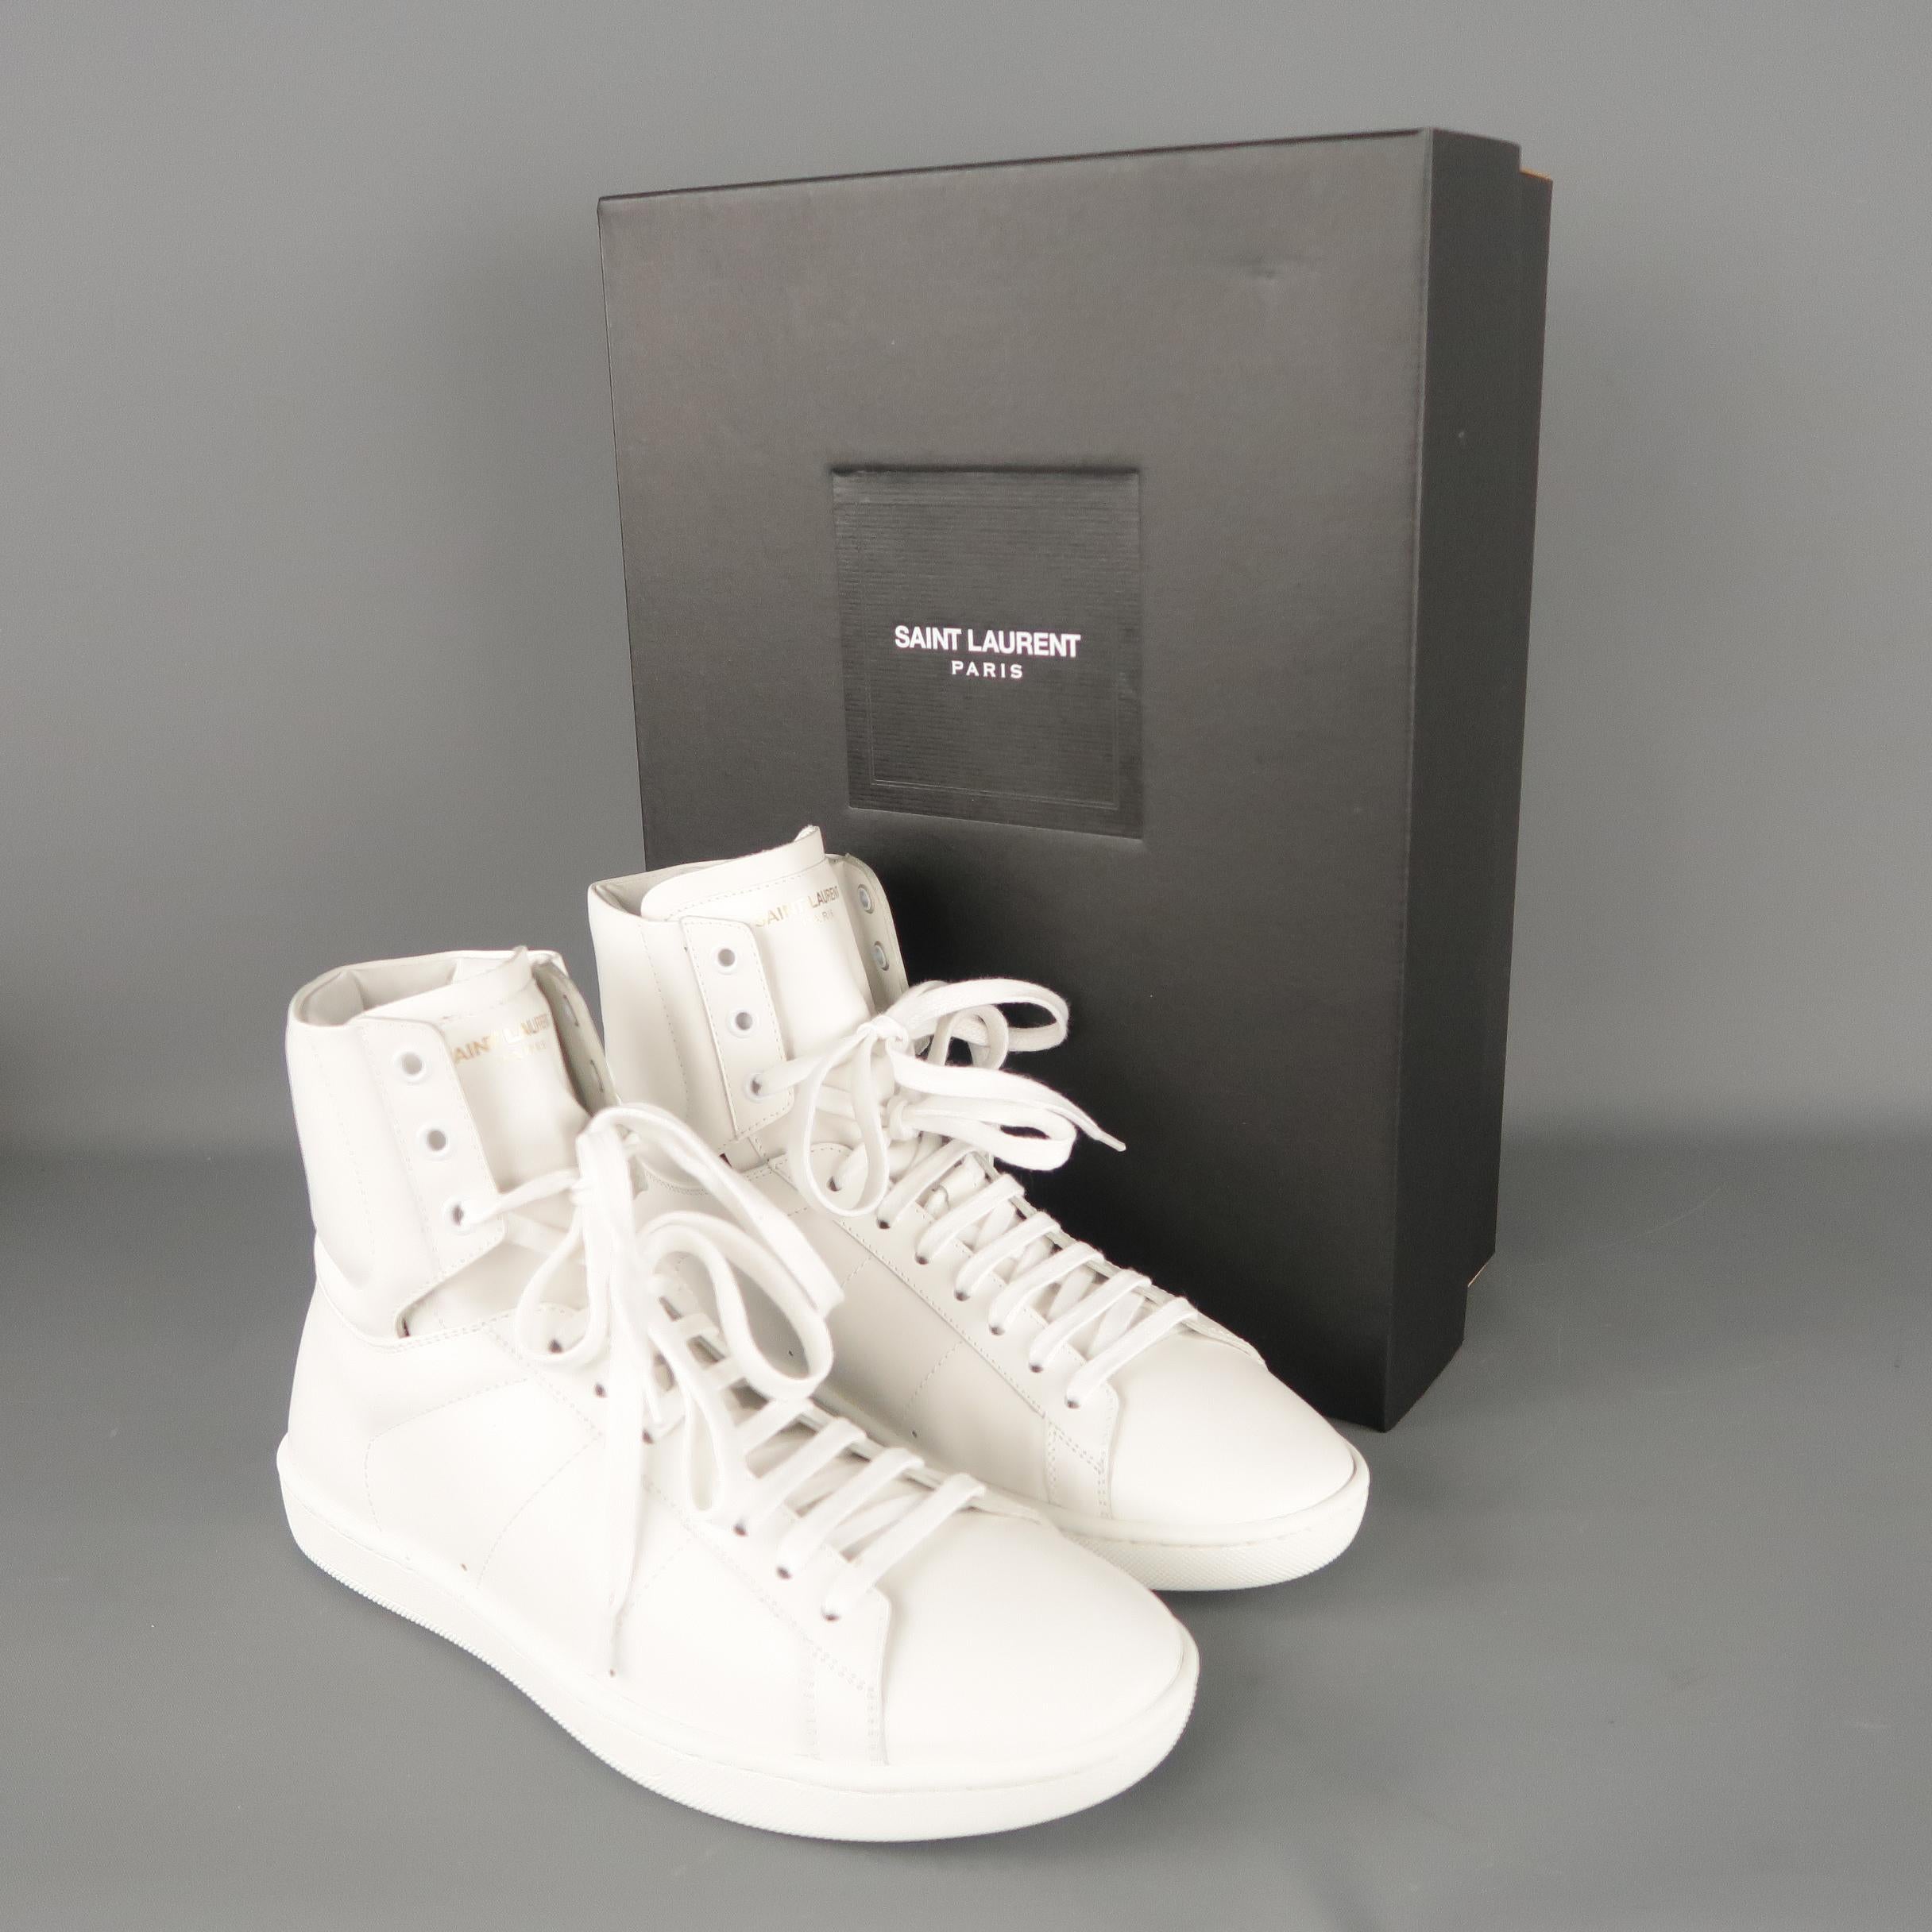 Men's SAINT LAURENT Size 6 White Leather High Top Sneakers w/ Box 10